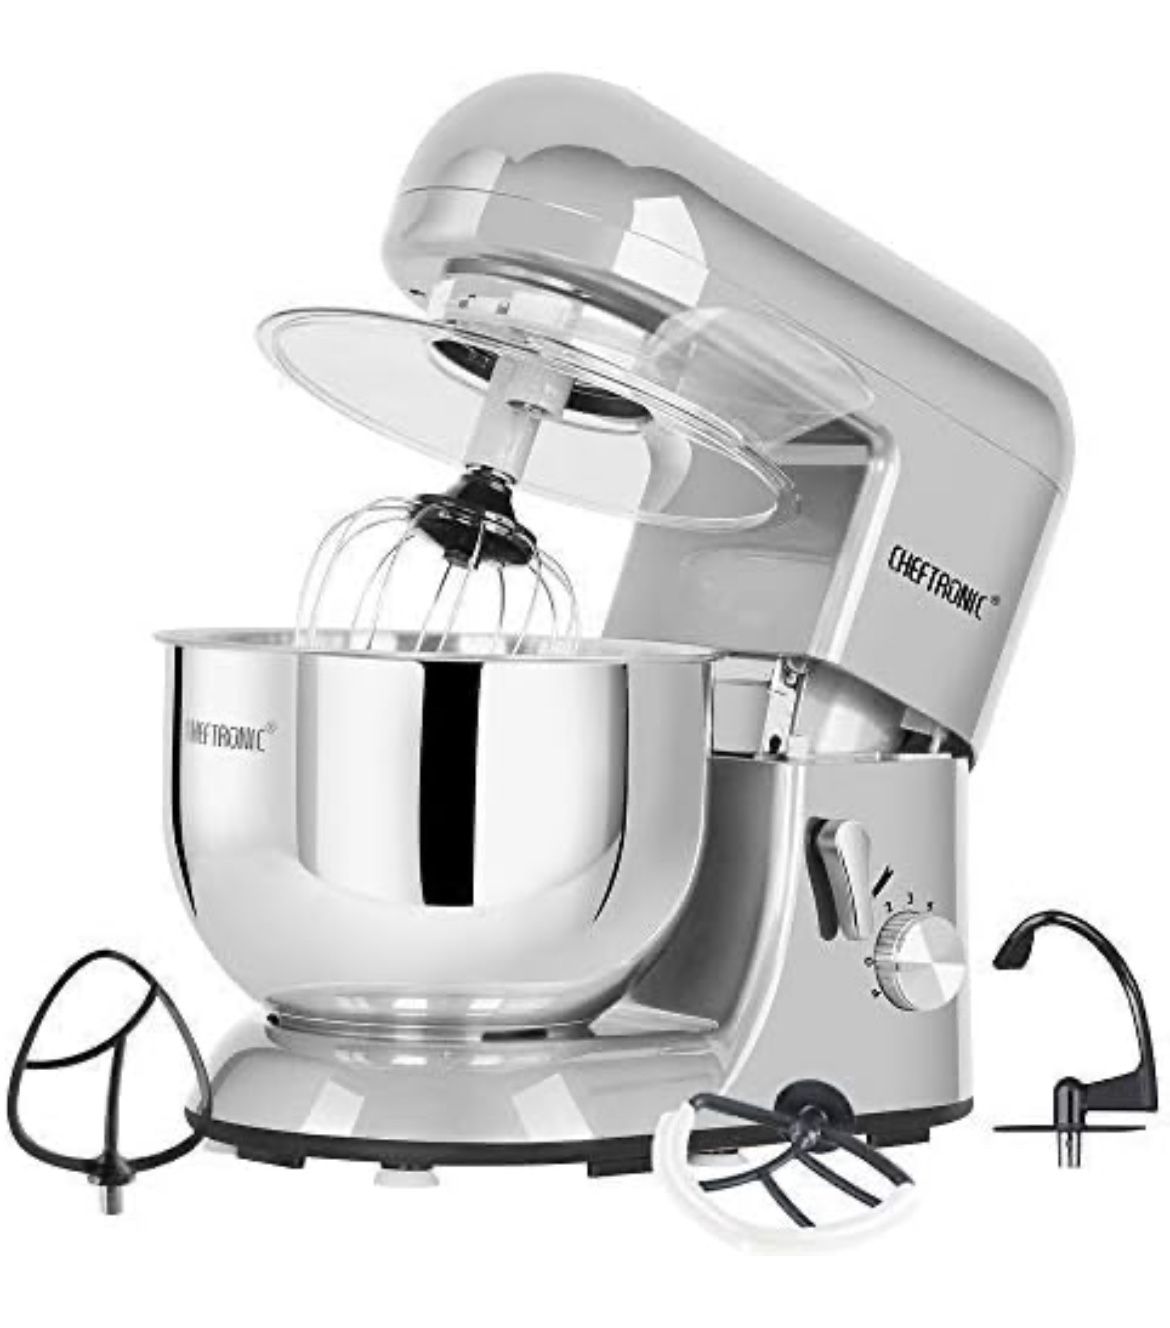 CHEFTRONIC Stand Mixer Tilt-head Mixers Kitchen Electric Dough Mixer for Household Aids 120V/650W 5.5qt Stainless Steel Bowl (Silver)